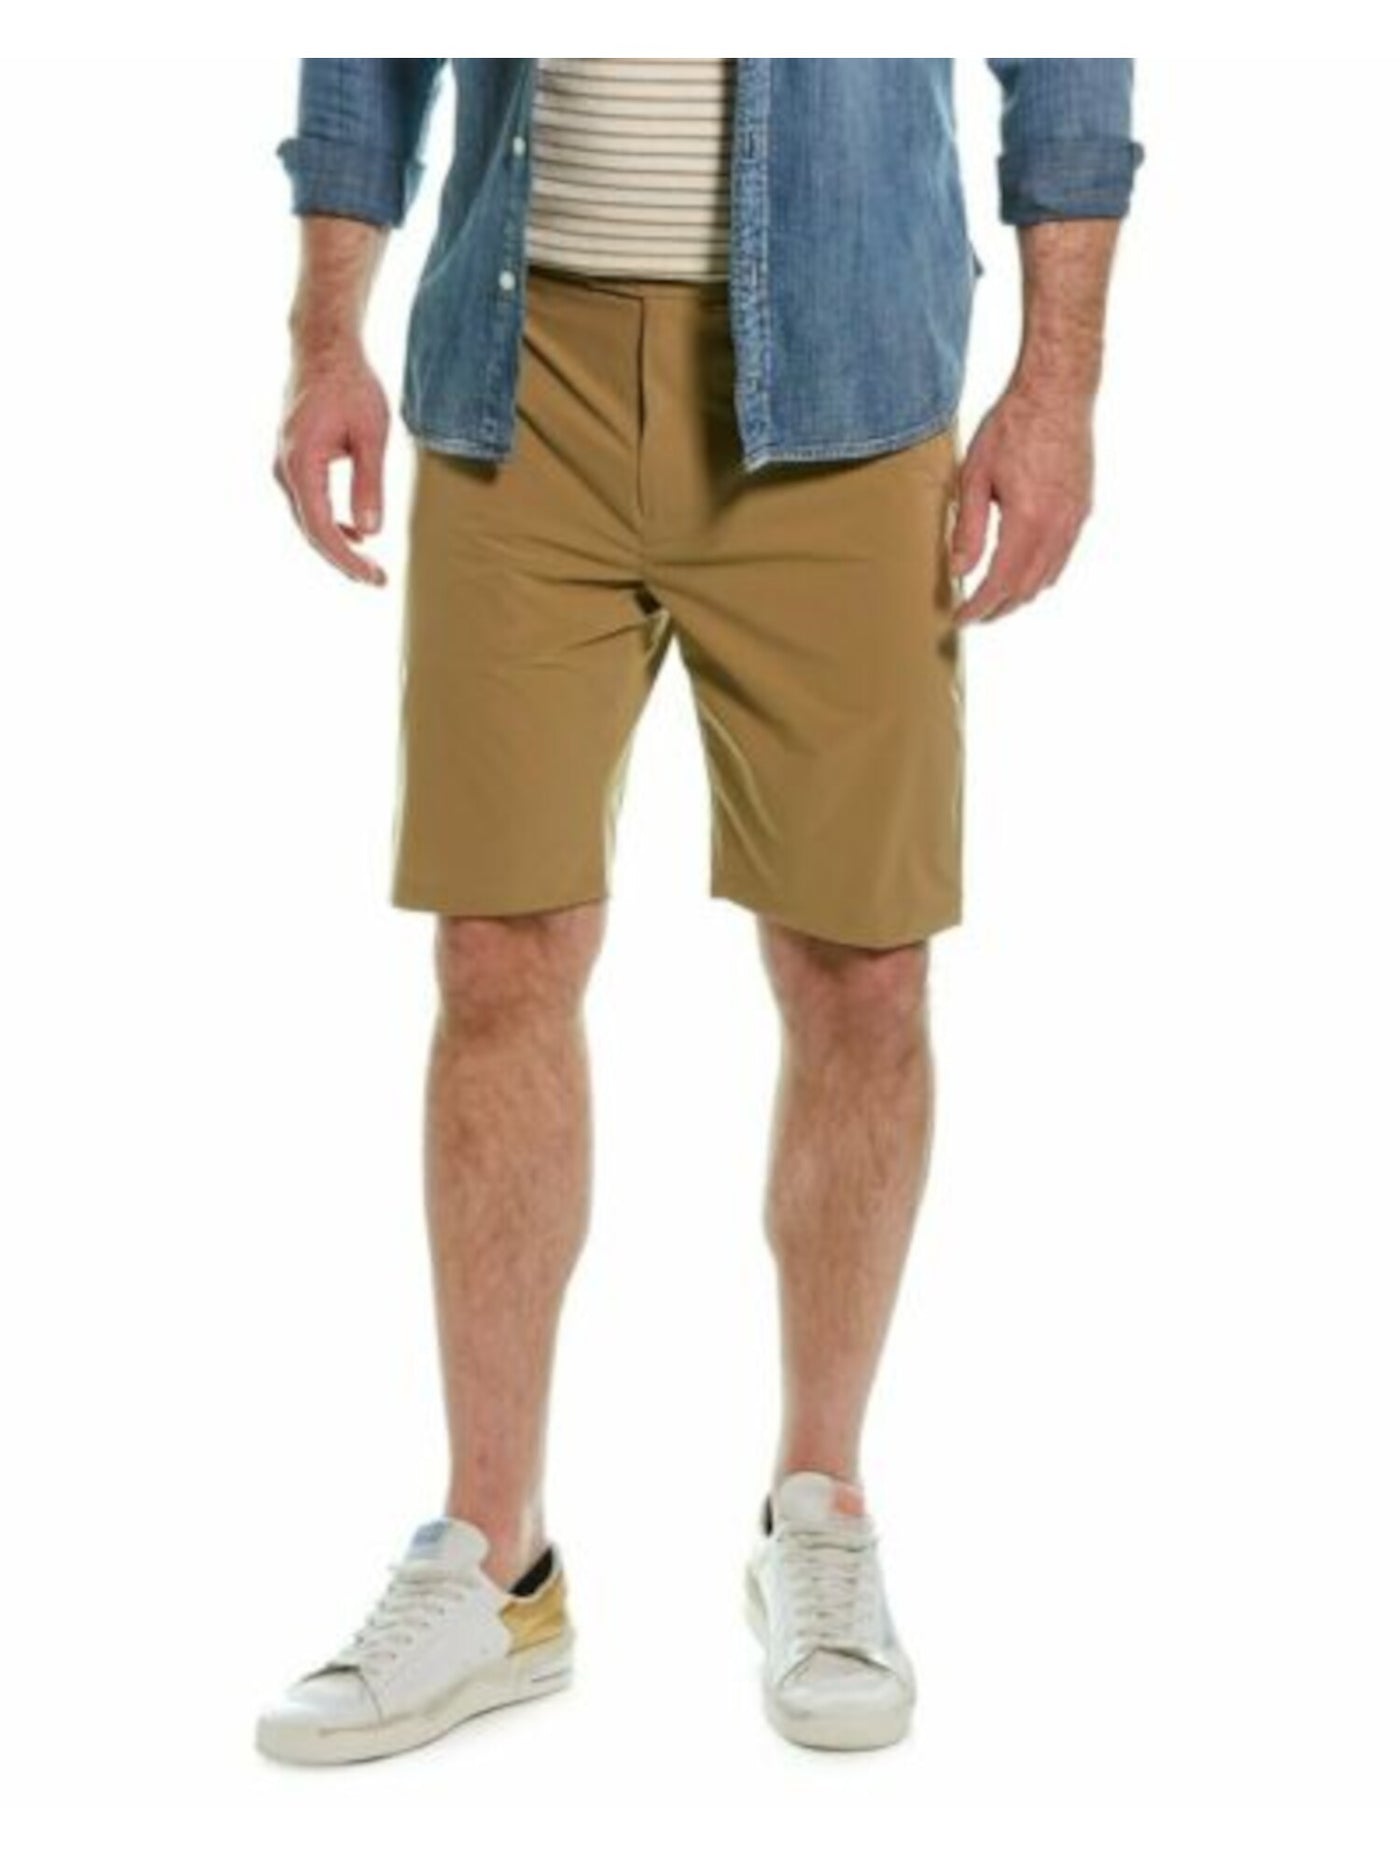 7 FOR ALL MANKIND Mens Brown Flat Front, Regular Fit Stretch Shorts 29 Waist